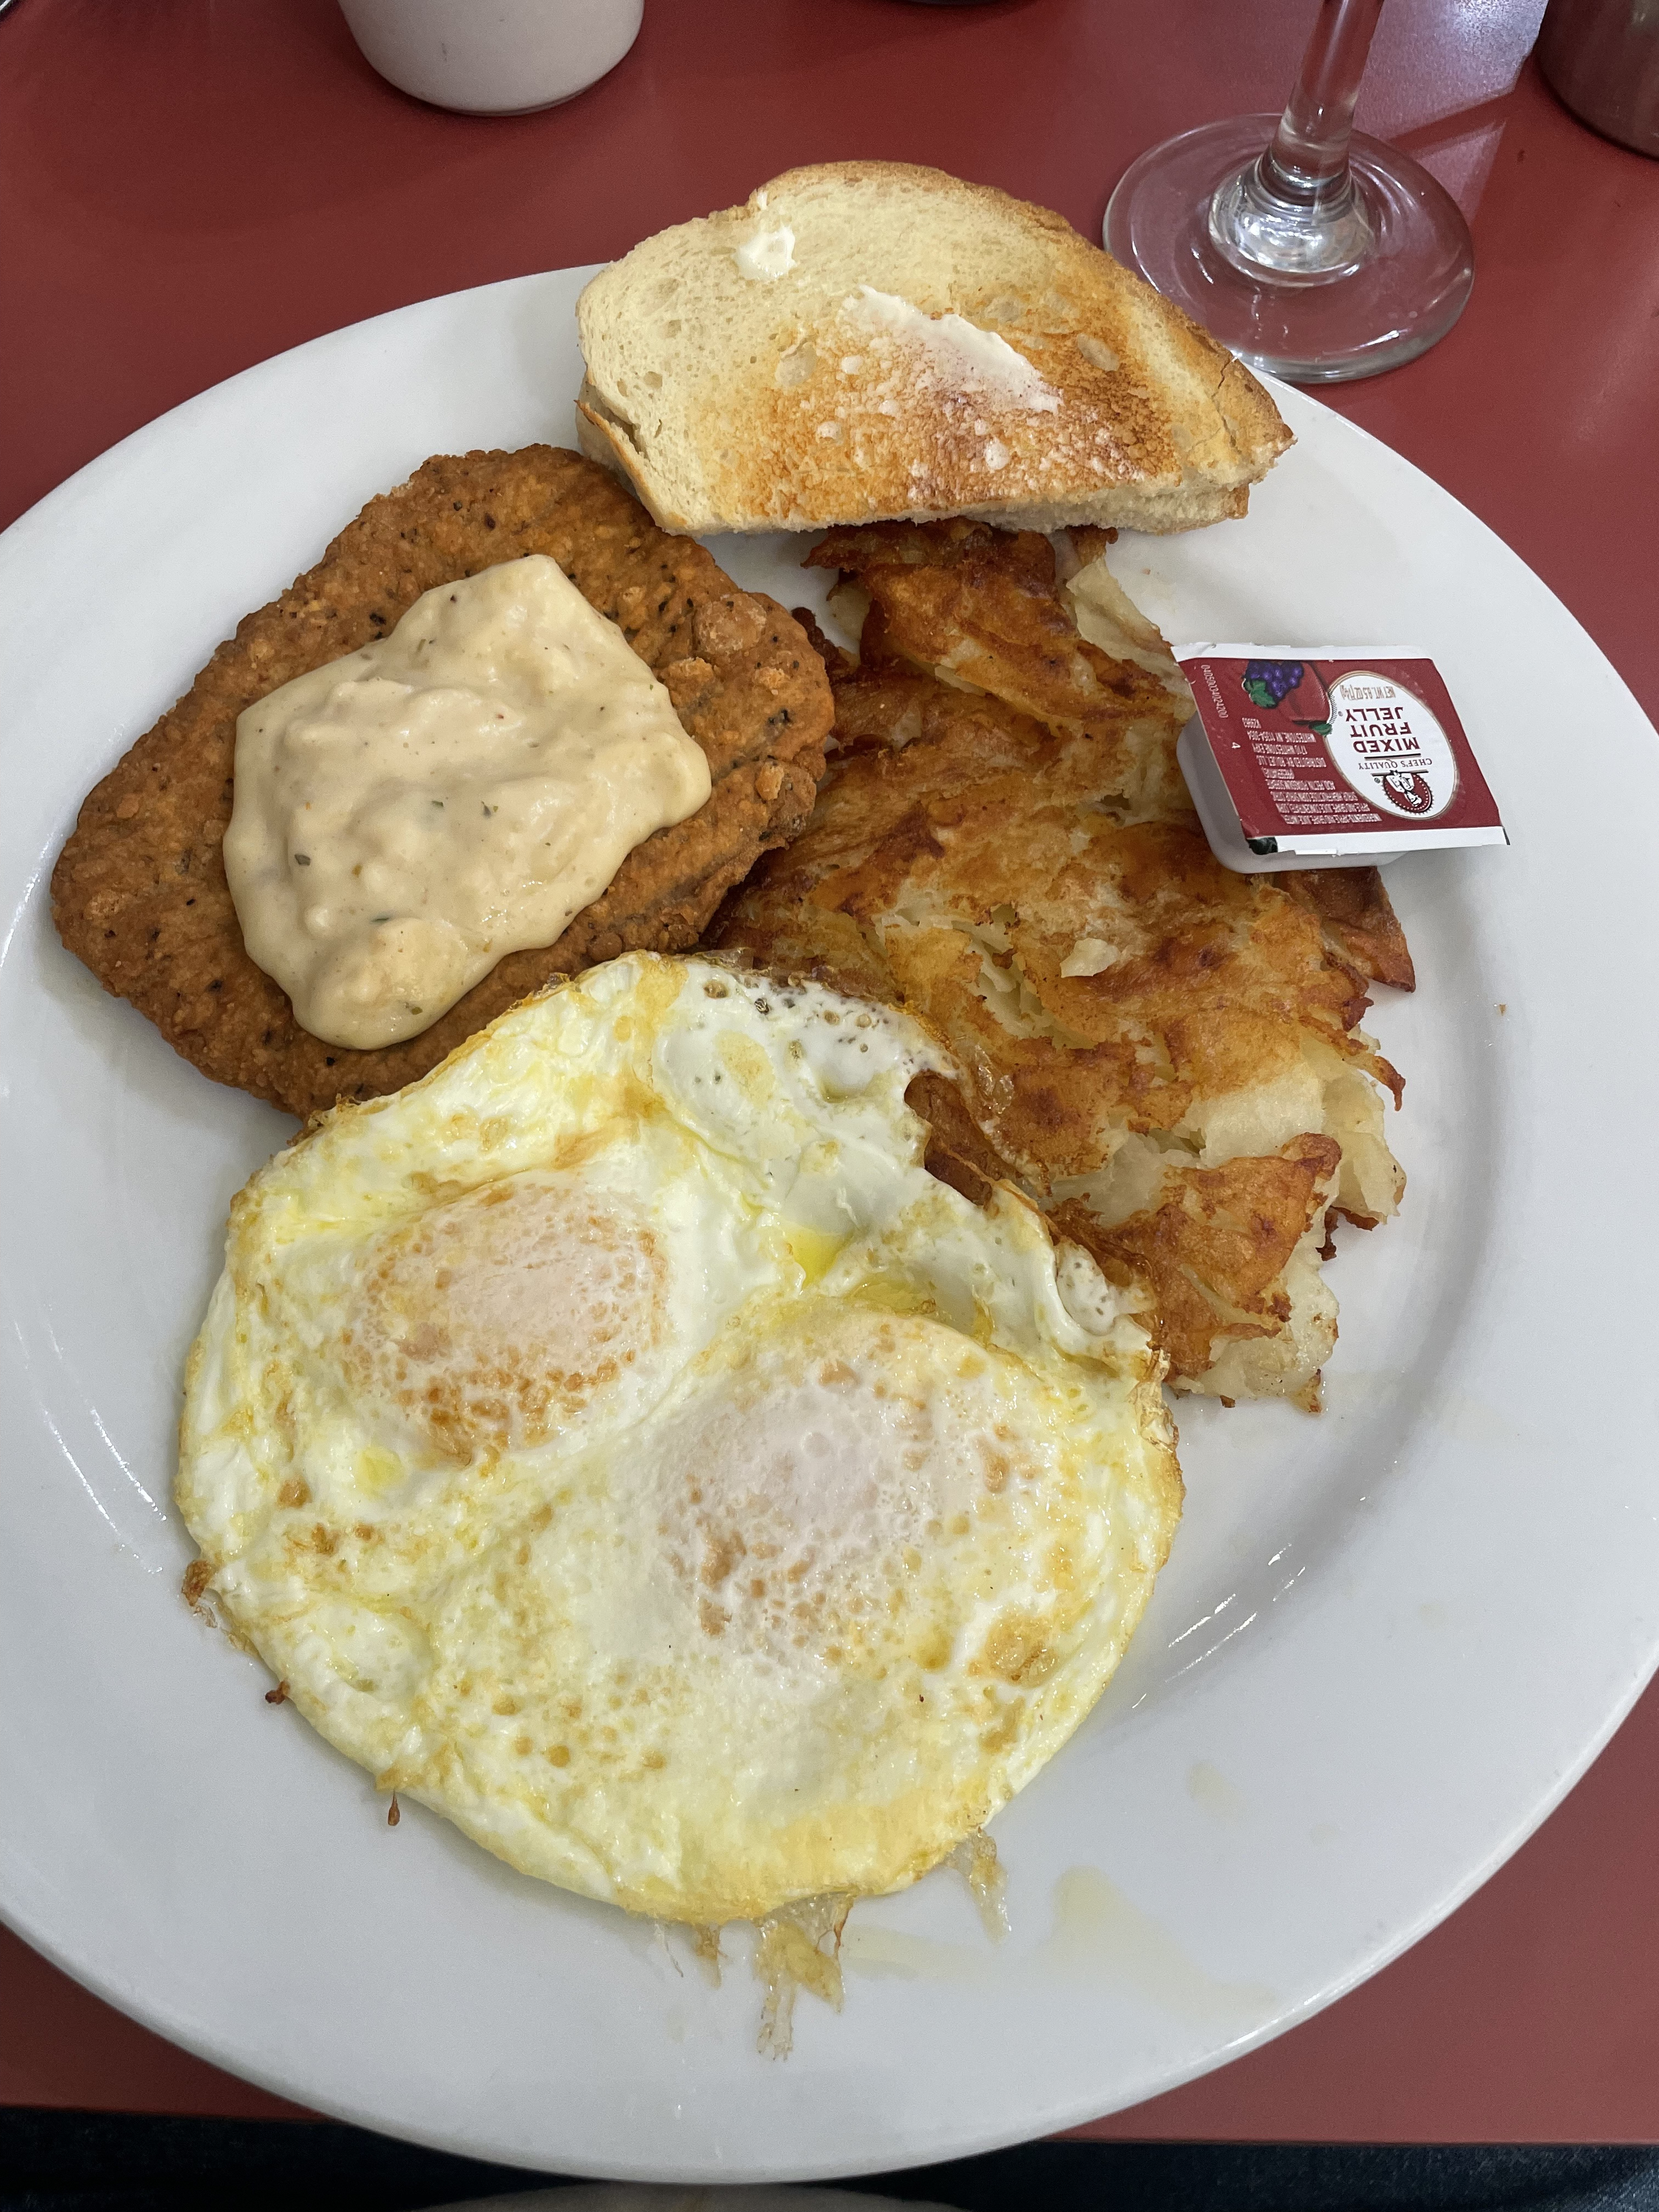 A plate with eggs, hash browns, fried chicken, gravy, toast, and a jelly packet.